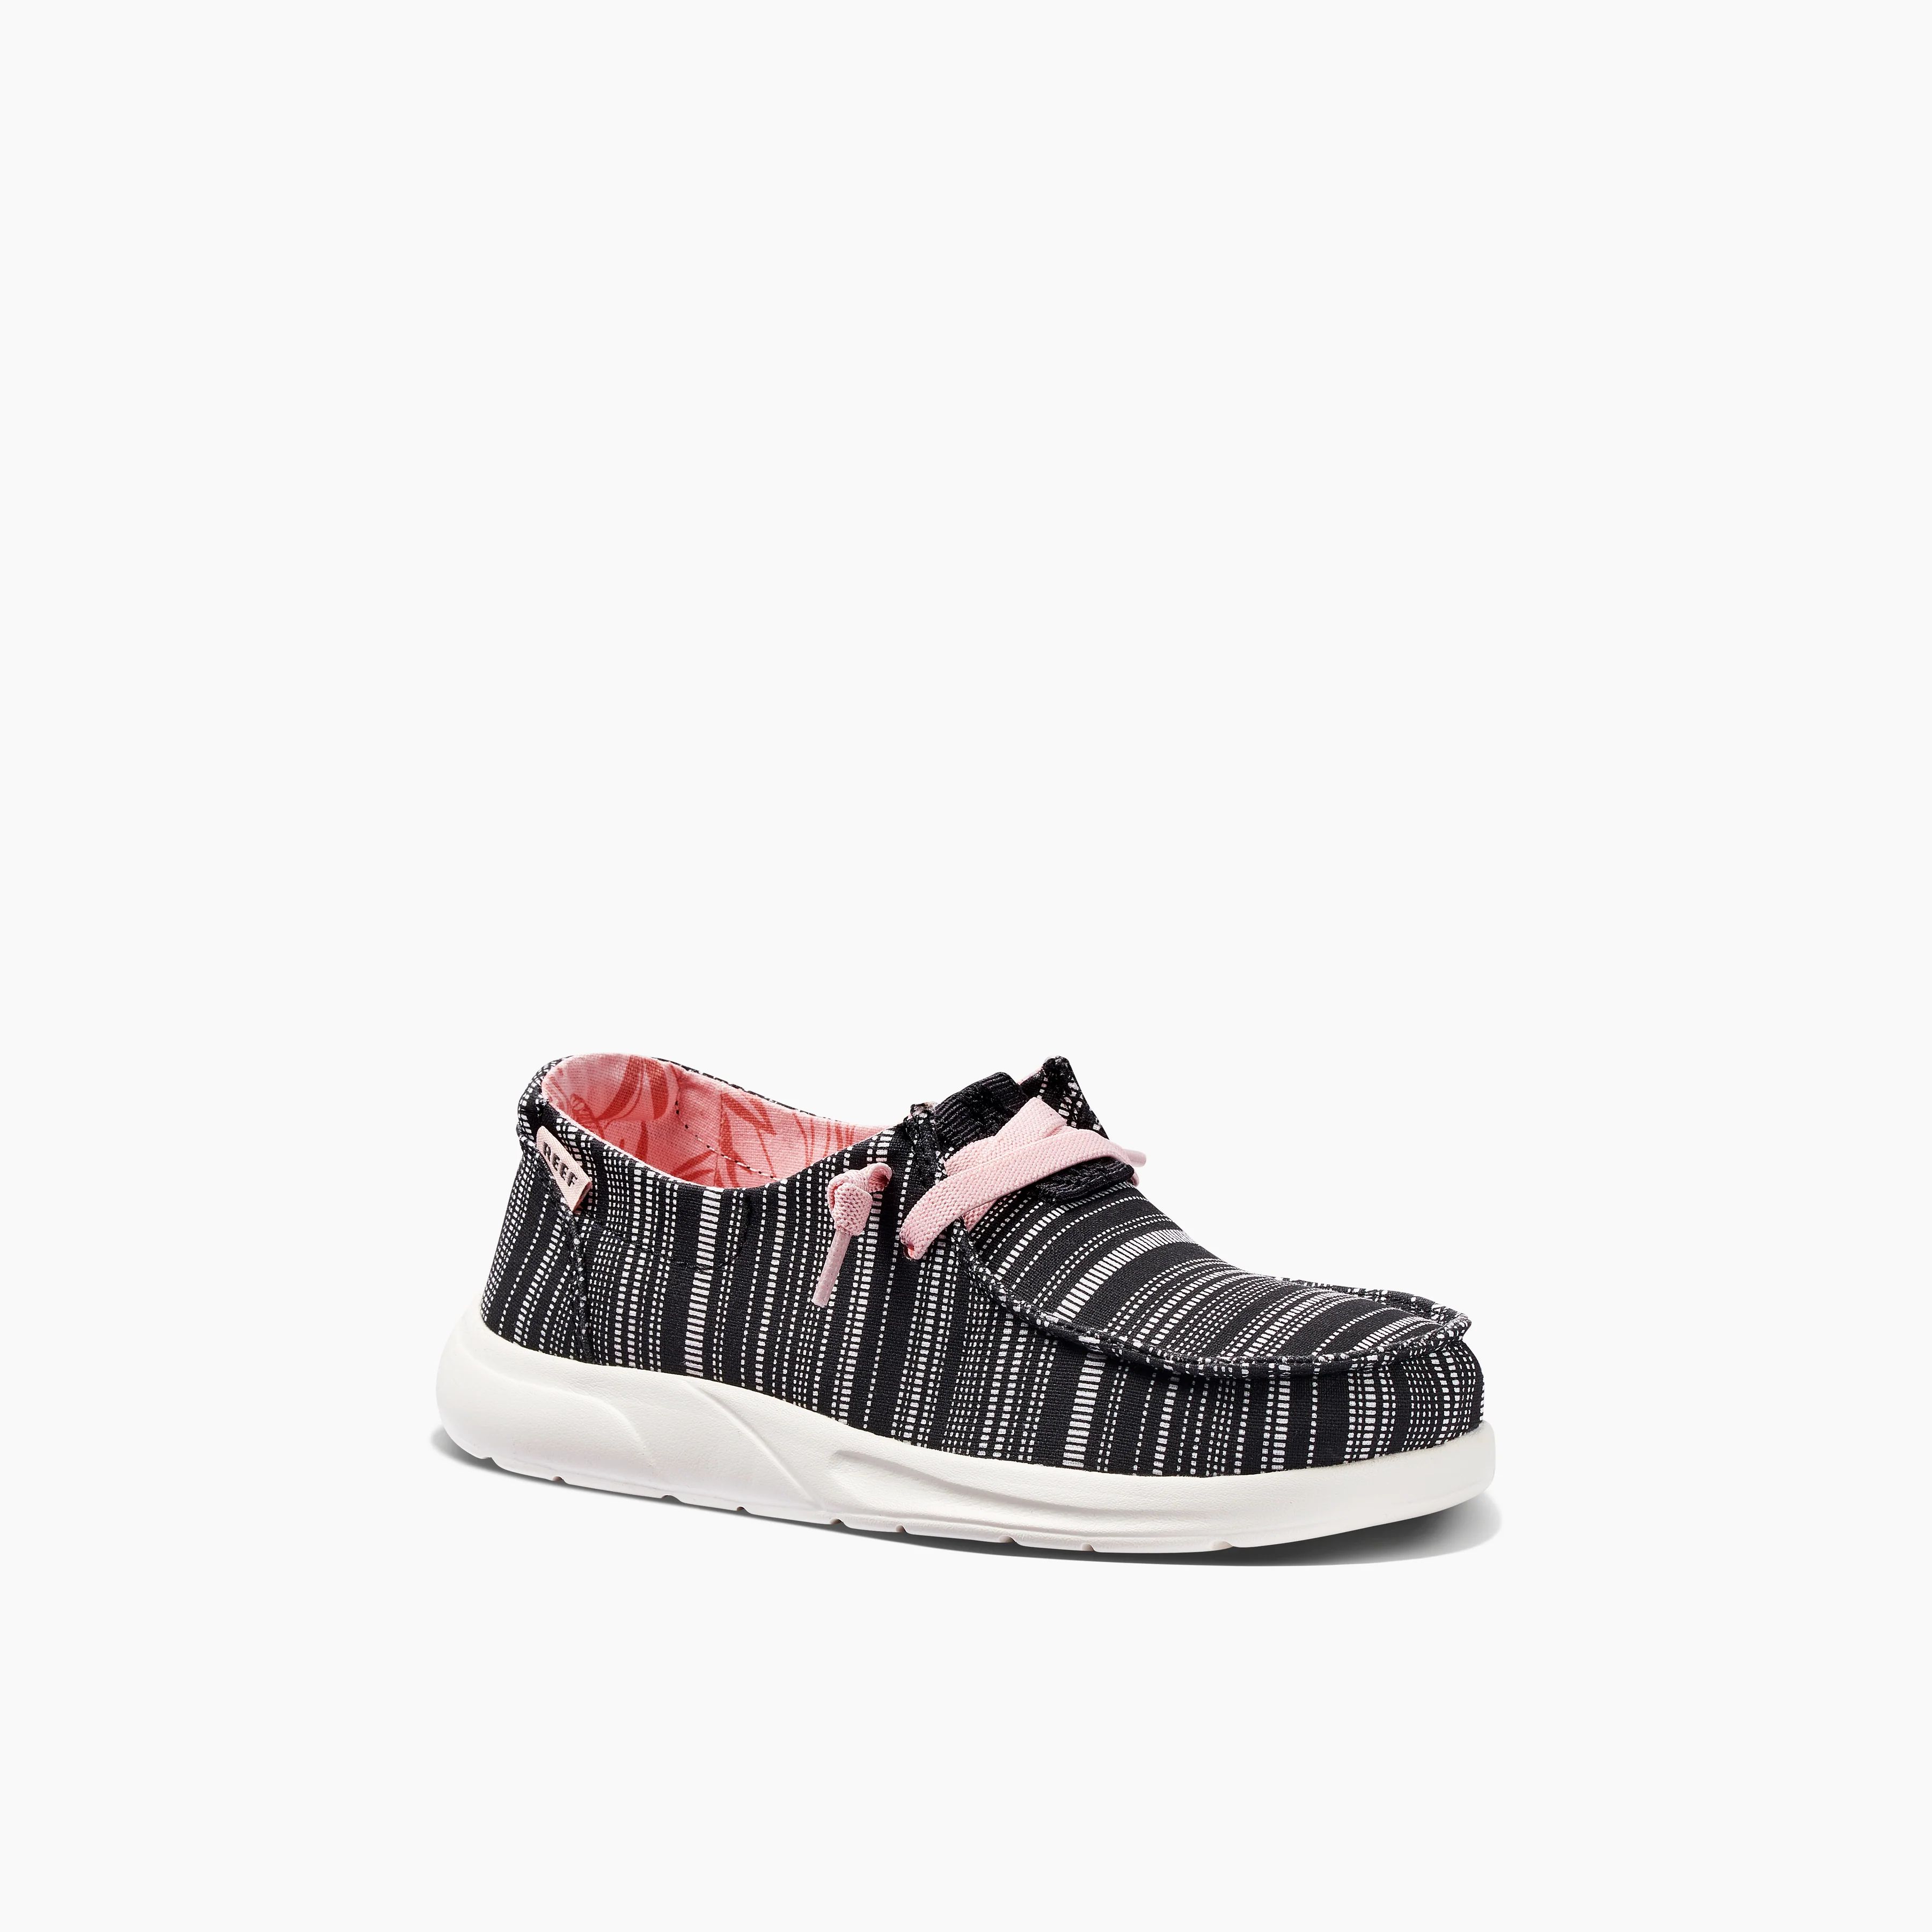 Girl's Shoes Kids Cushion Coast in Washed Ocean | REEF® | Reef